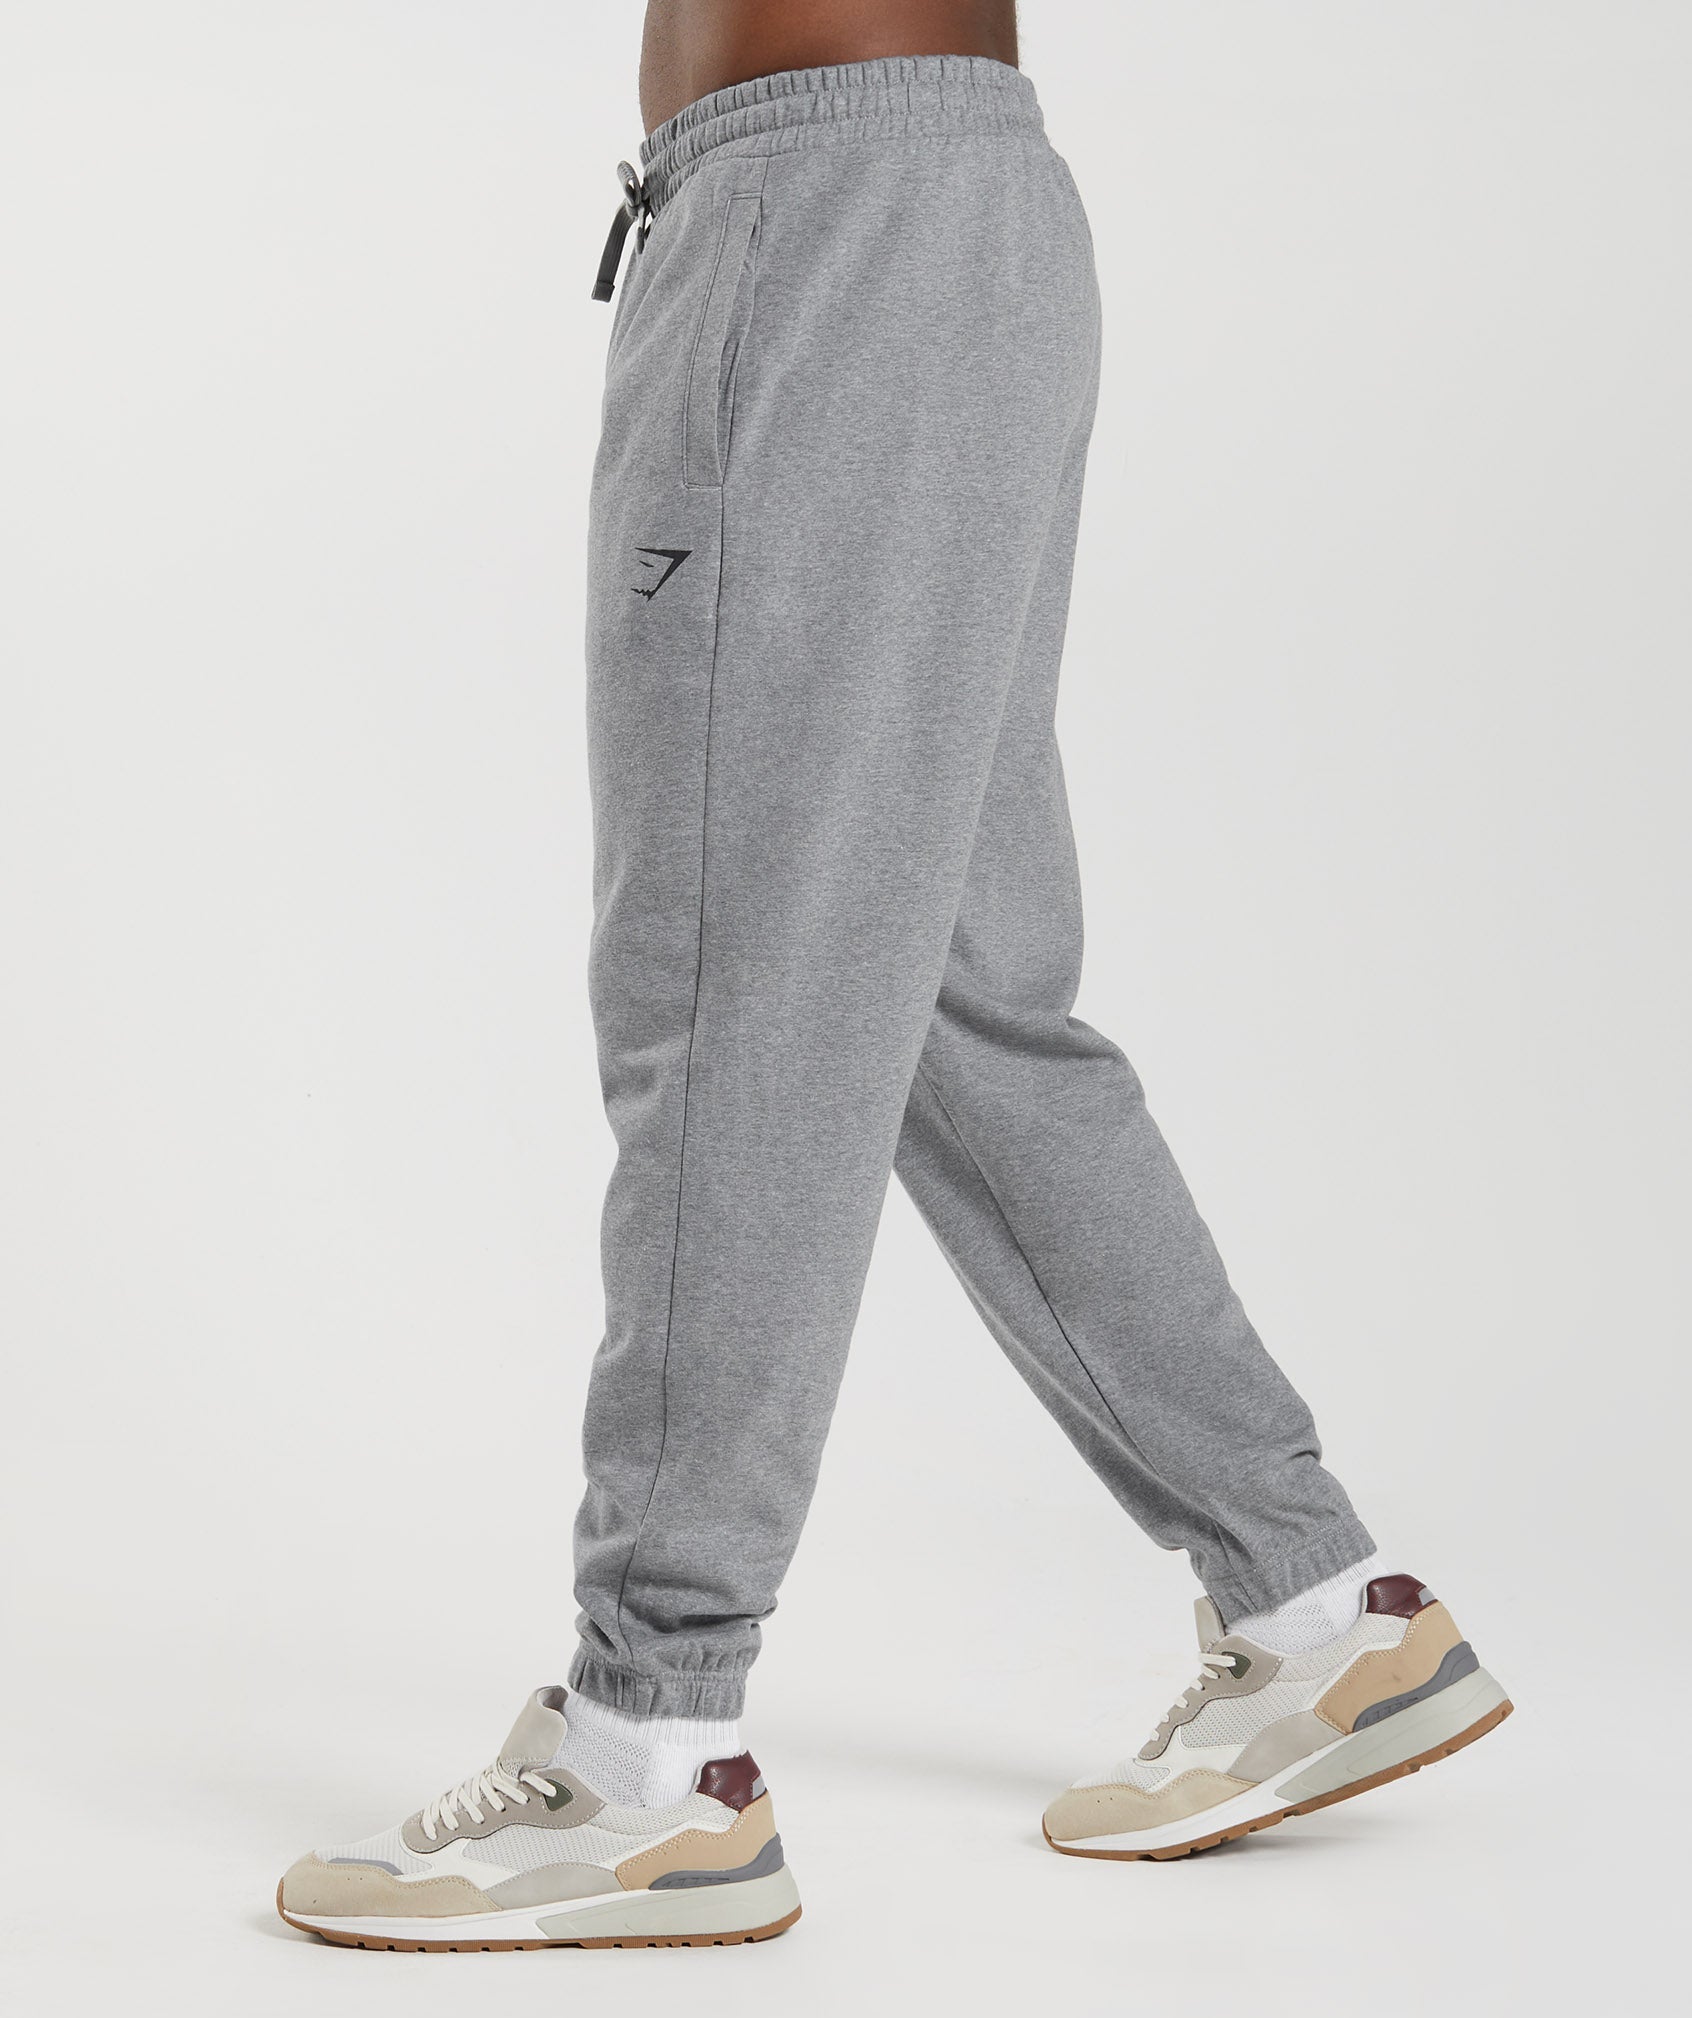 Gymshark Release Oversized Fit Jogger Pants – Sports Next Day